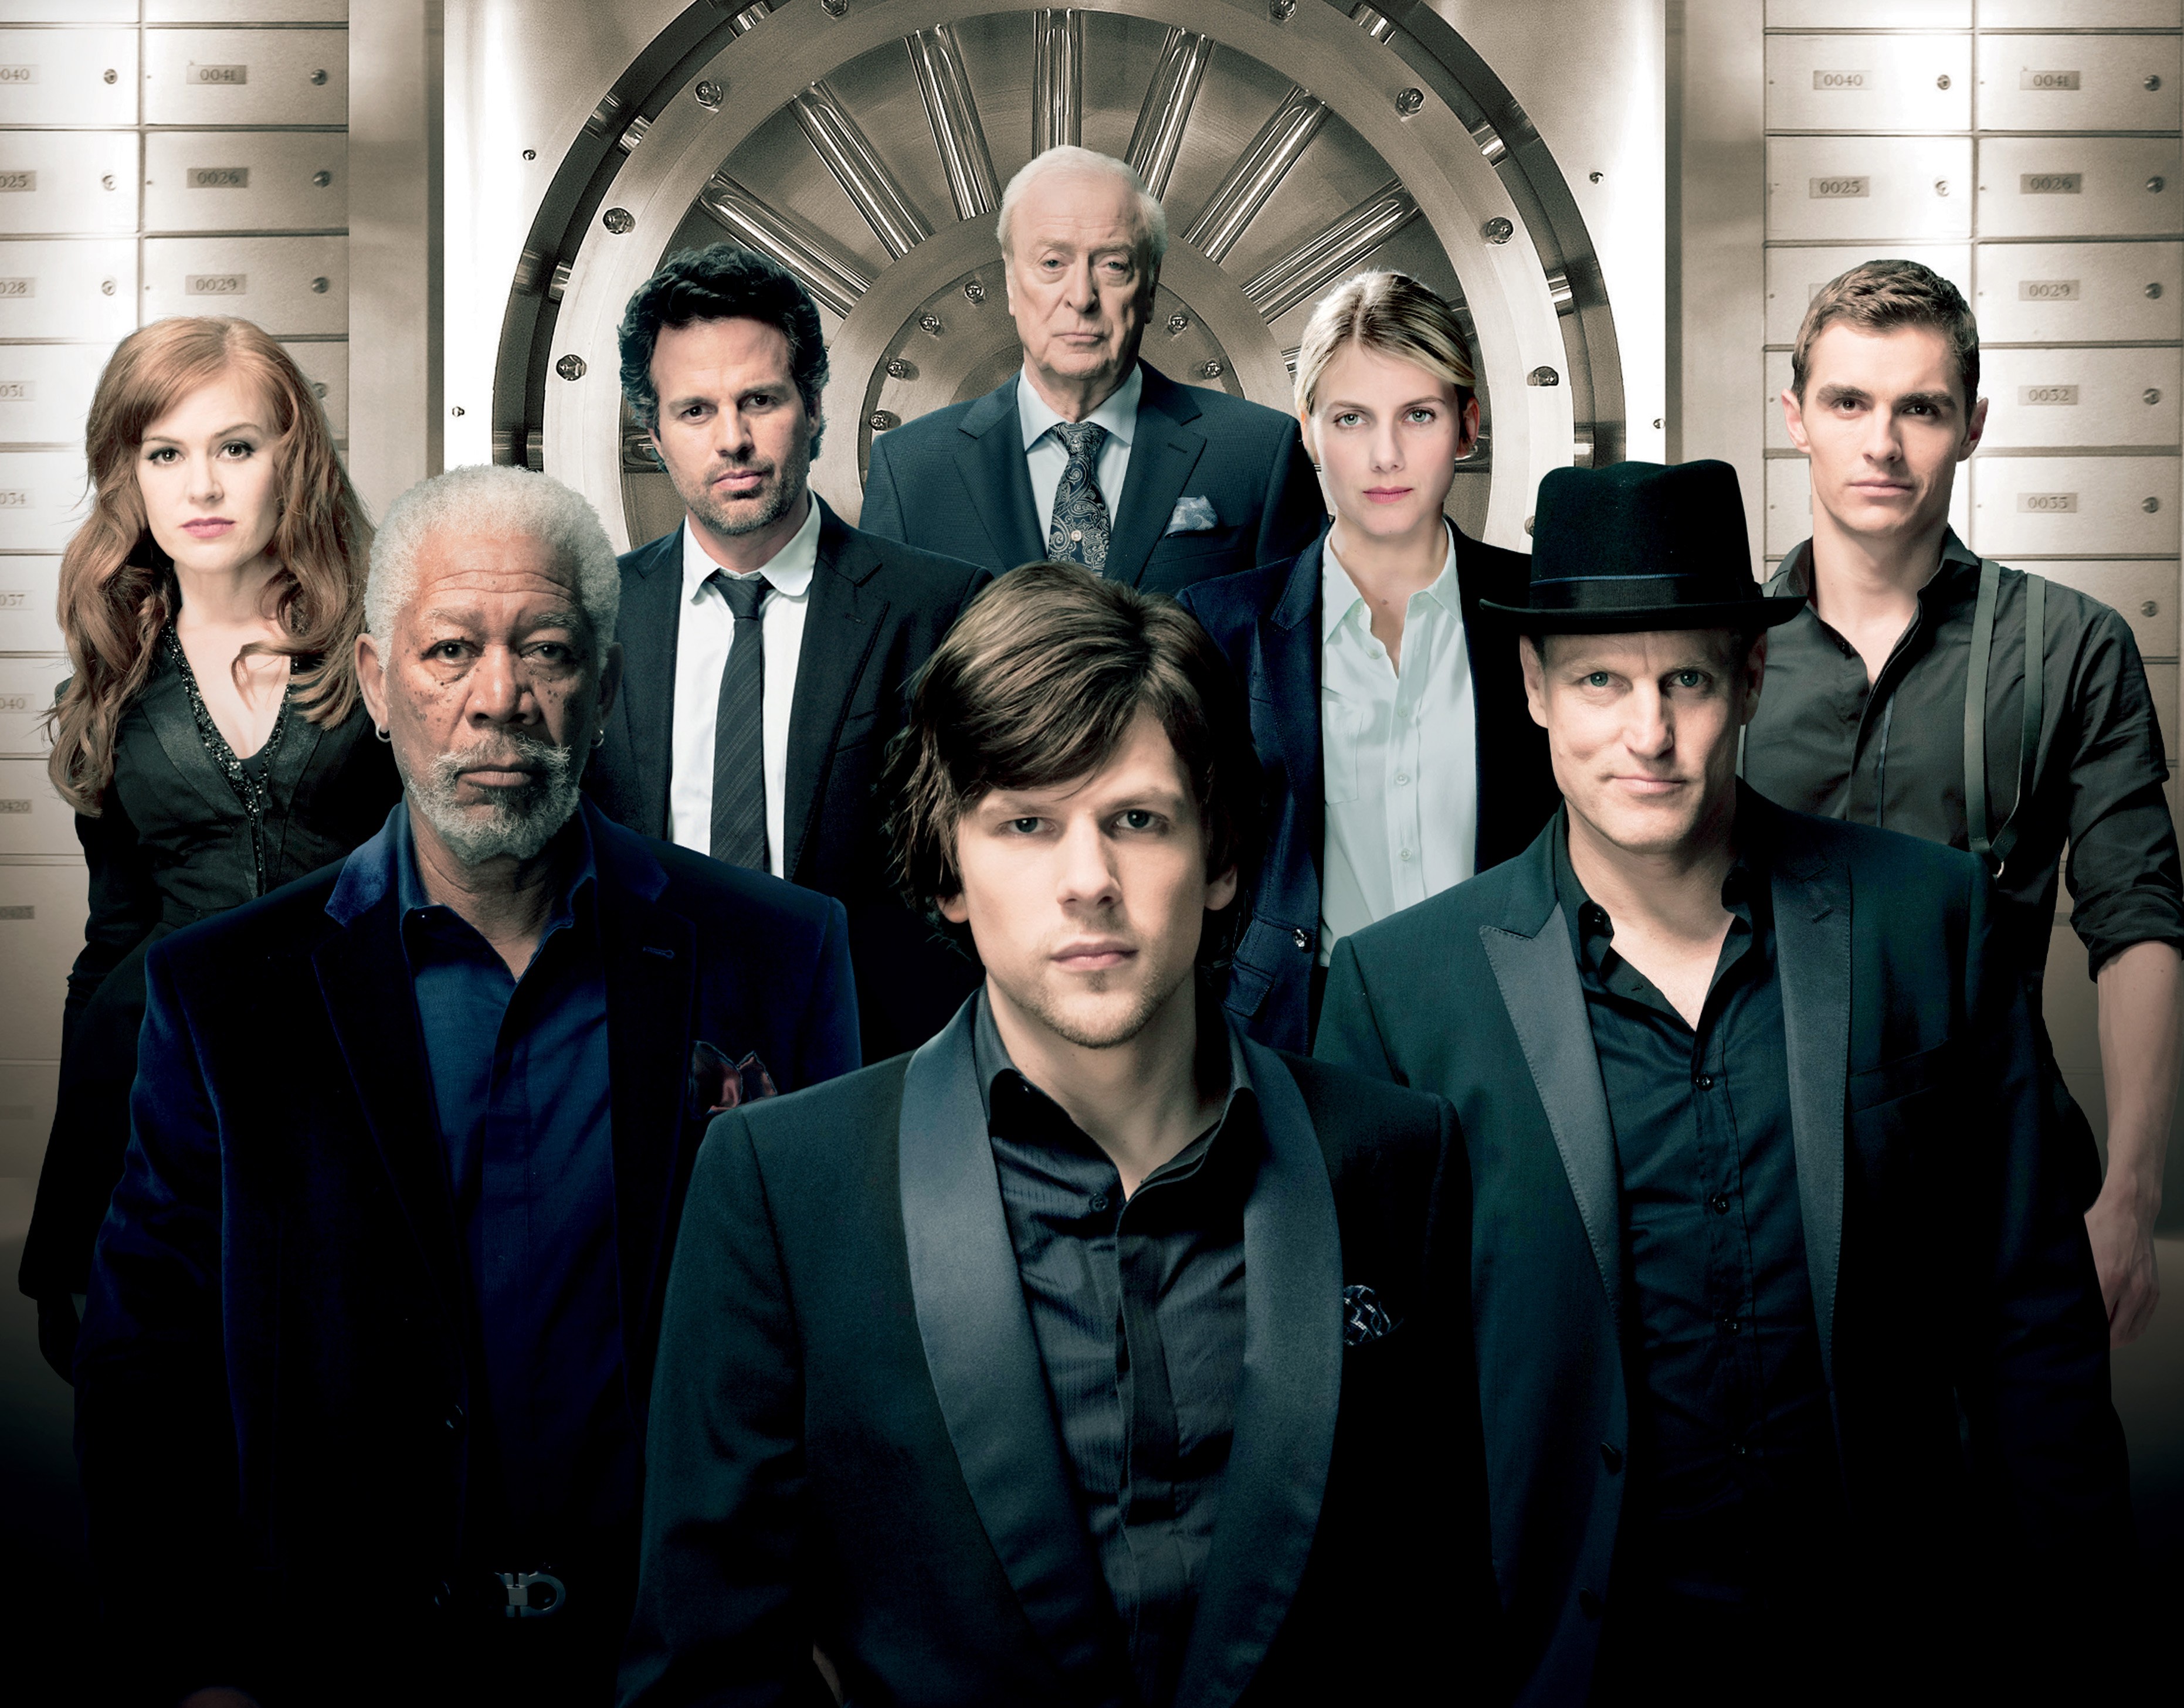 now you see me wallpaper,social group,team,event,movie,white collar worker